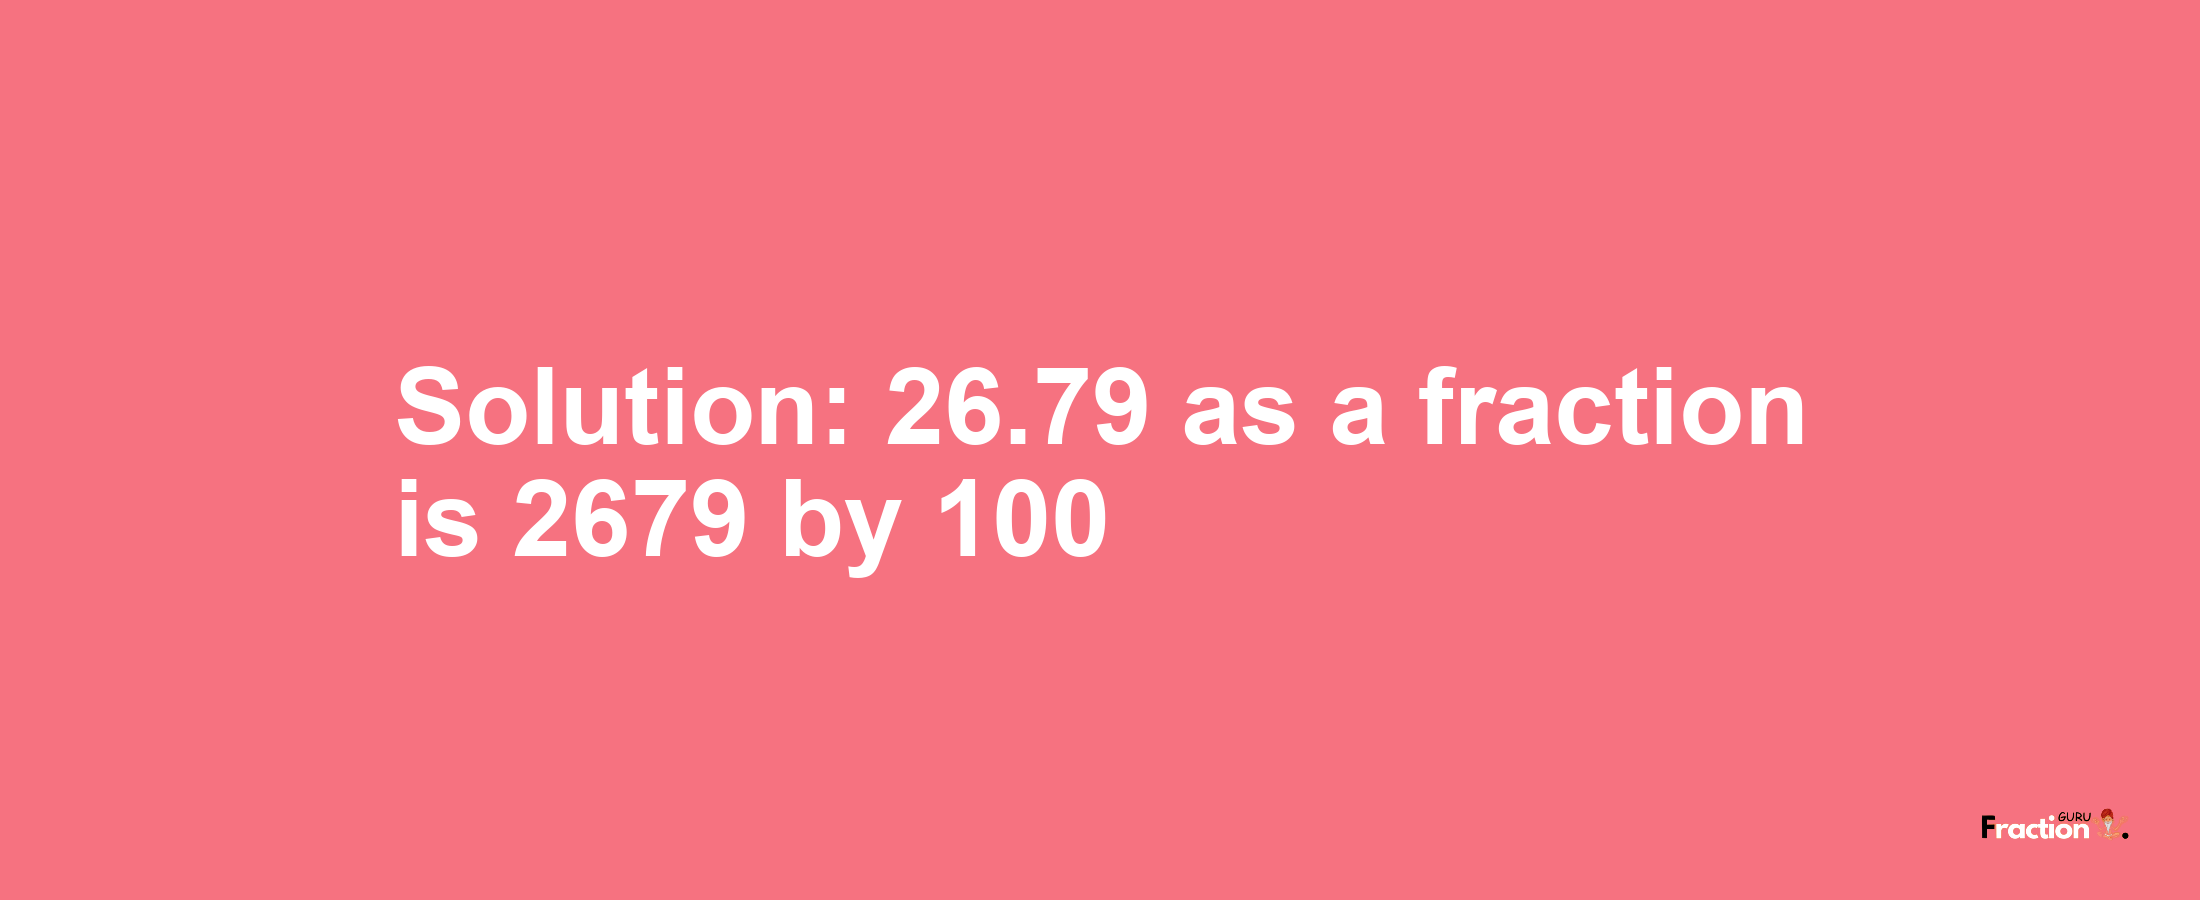 Solution:26.79 as a fraction is 2679/100